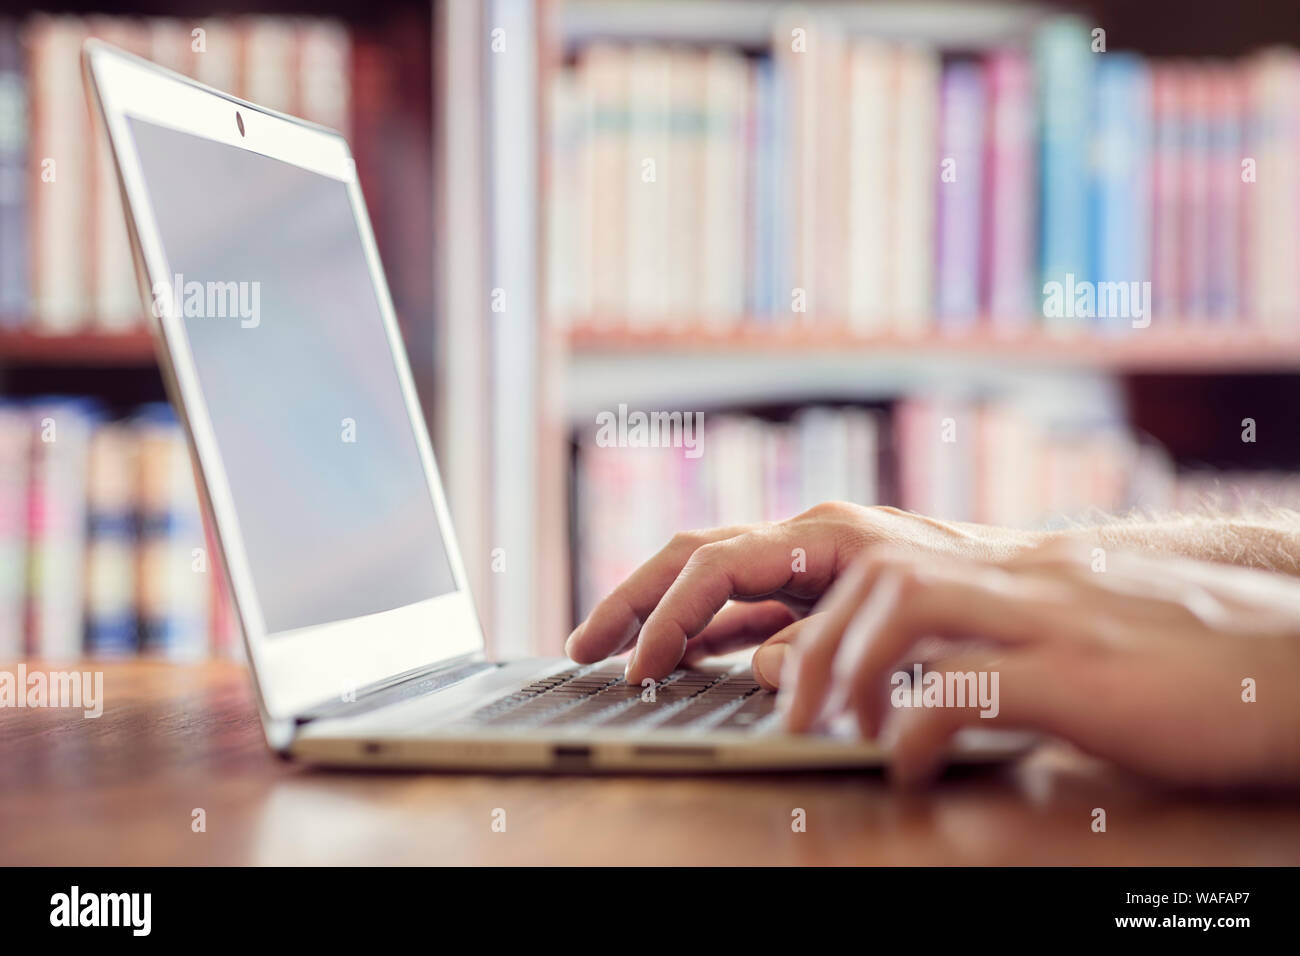 Hands typing on laptop computer in library concept for education, writer or research Stock Photo